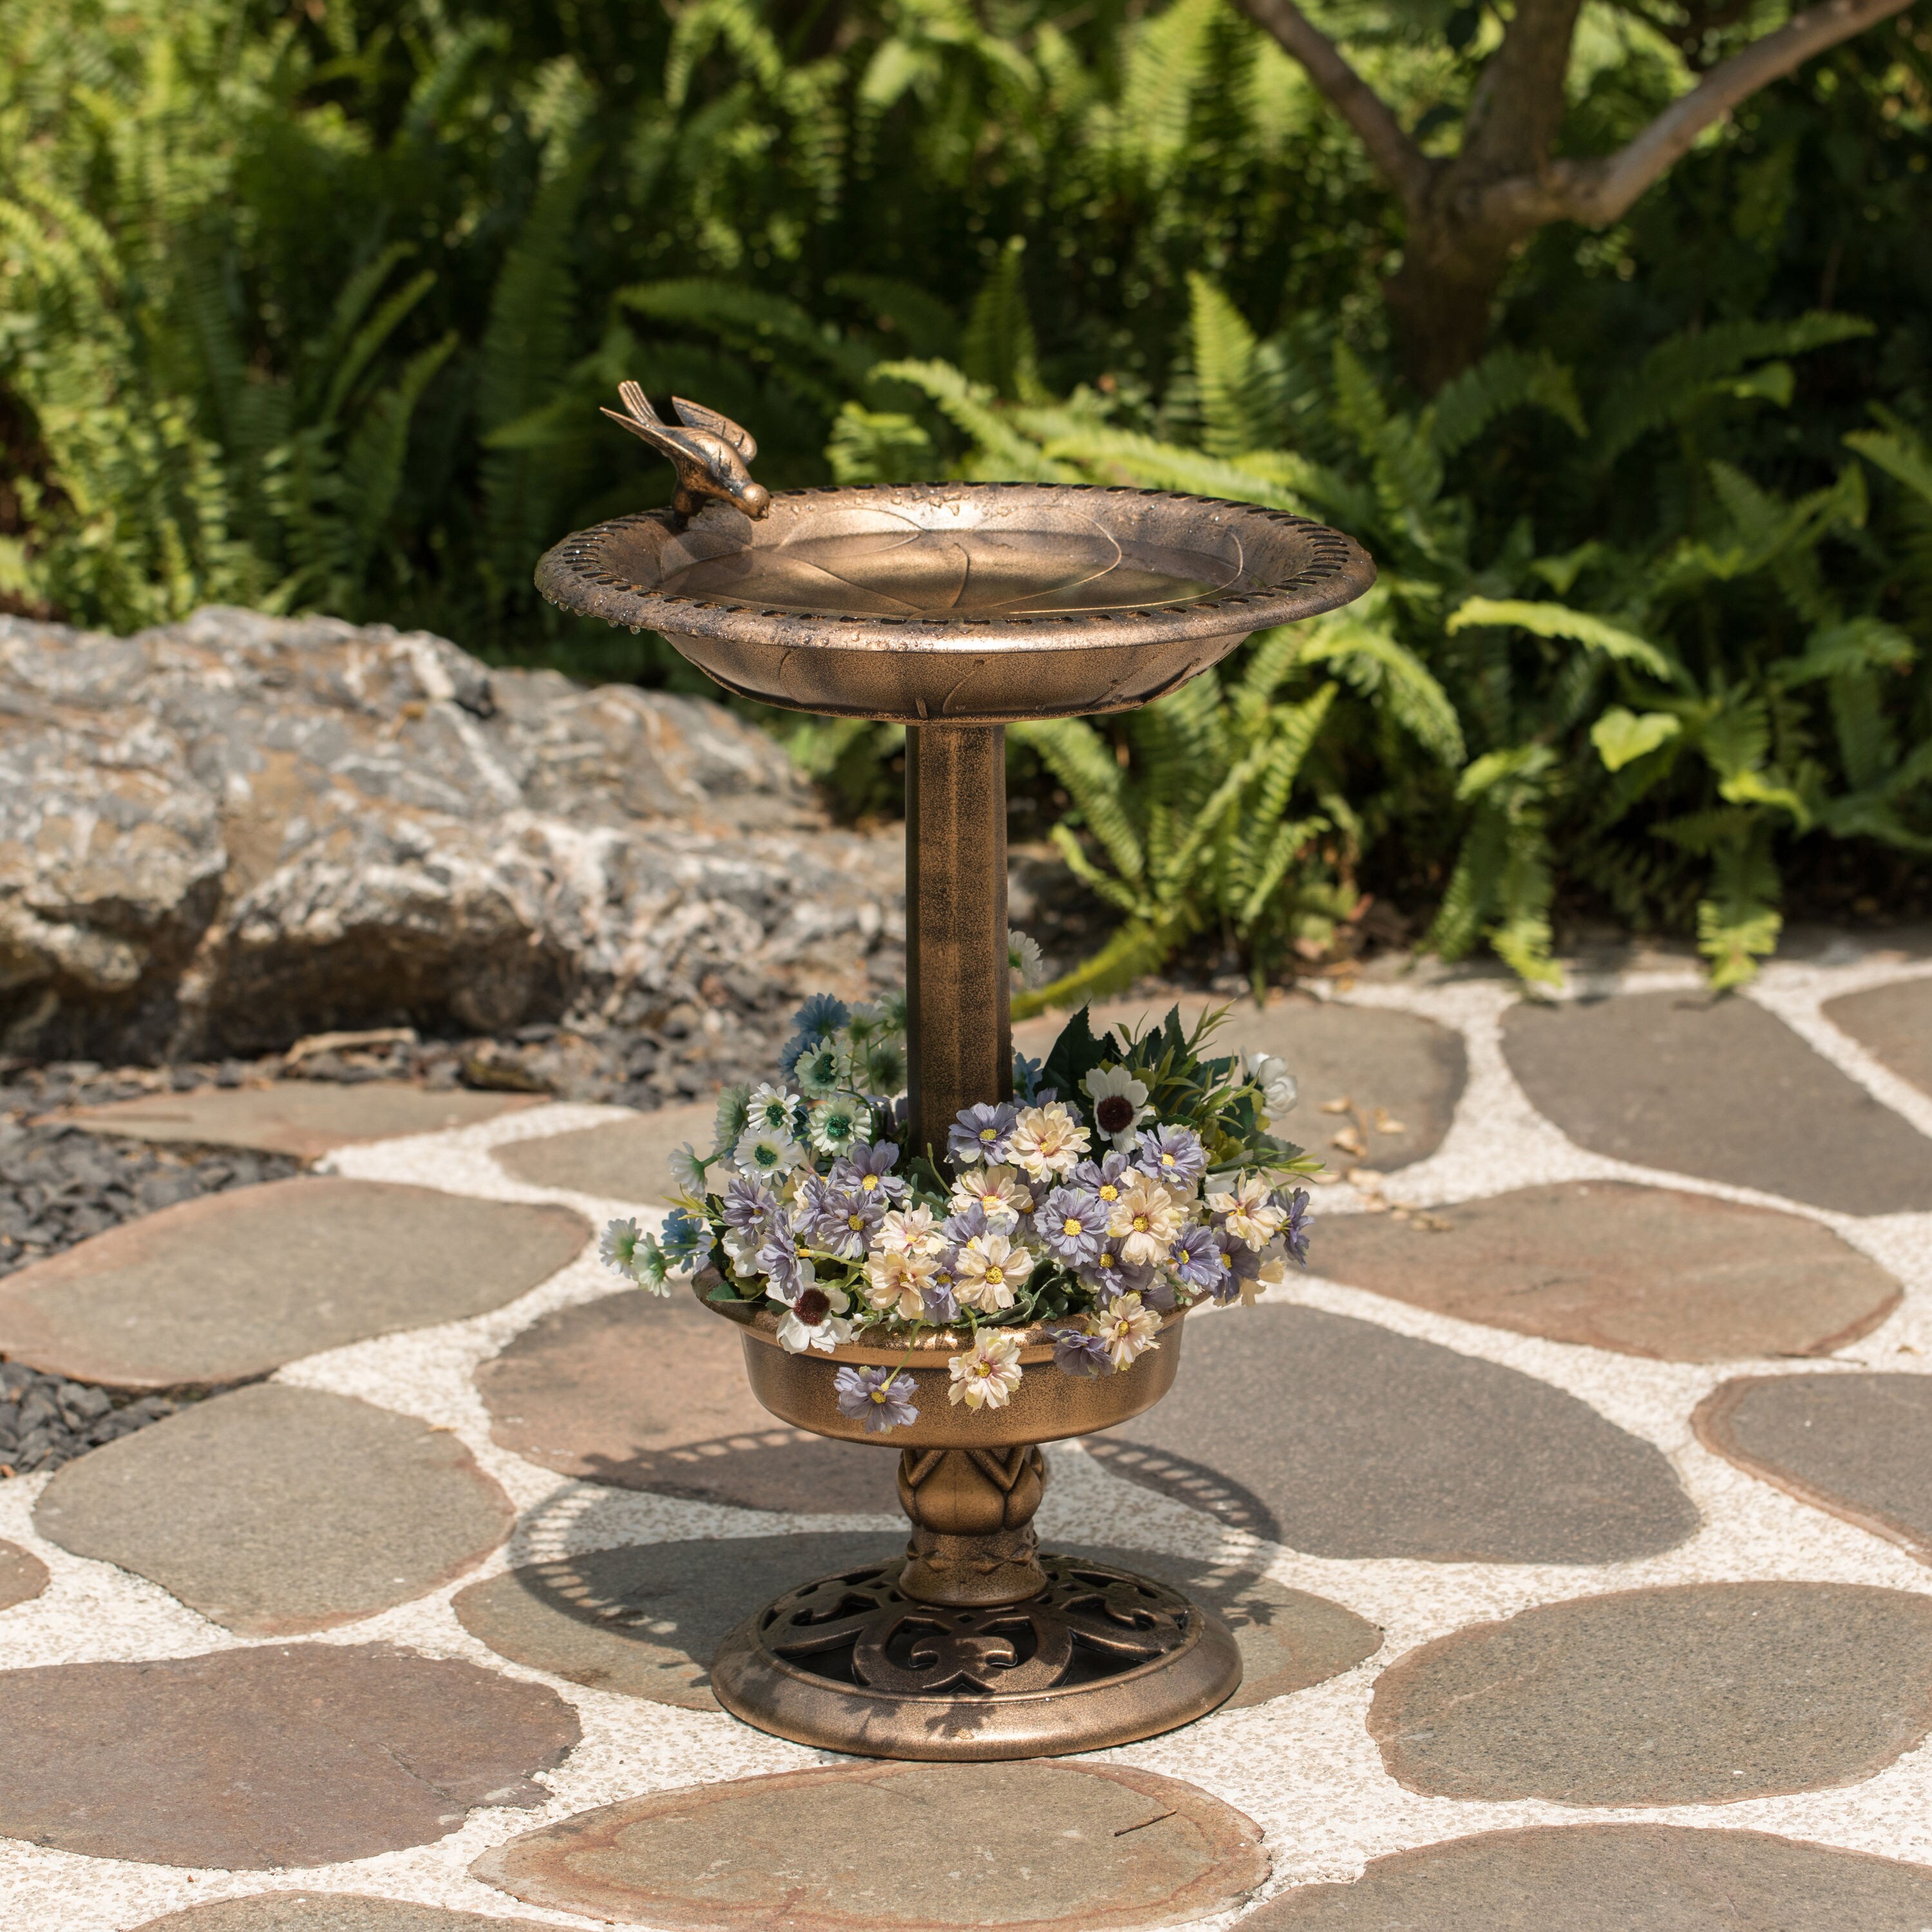 BIRD BATH FEEDER STATION WITH DOUBLE SOLAR LIGHT FREE STANDING ORNAMENT PLANTER 